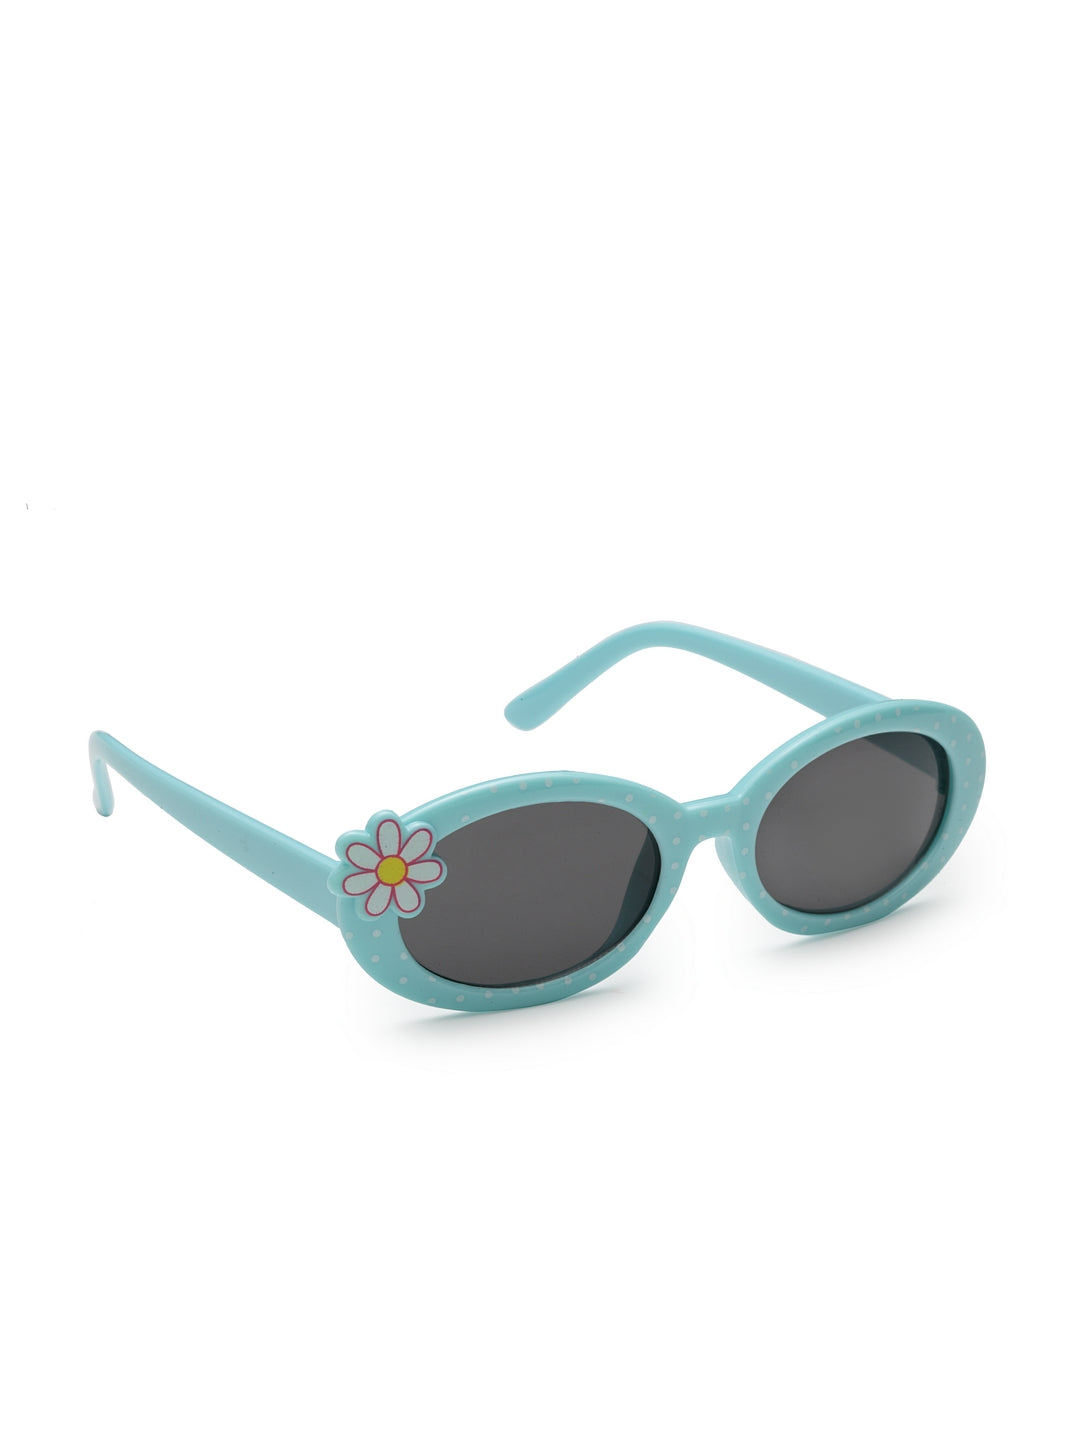 Stol'n Kids Yellow and Blue Bow Applique Rectangular Sunglasses Black and Green